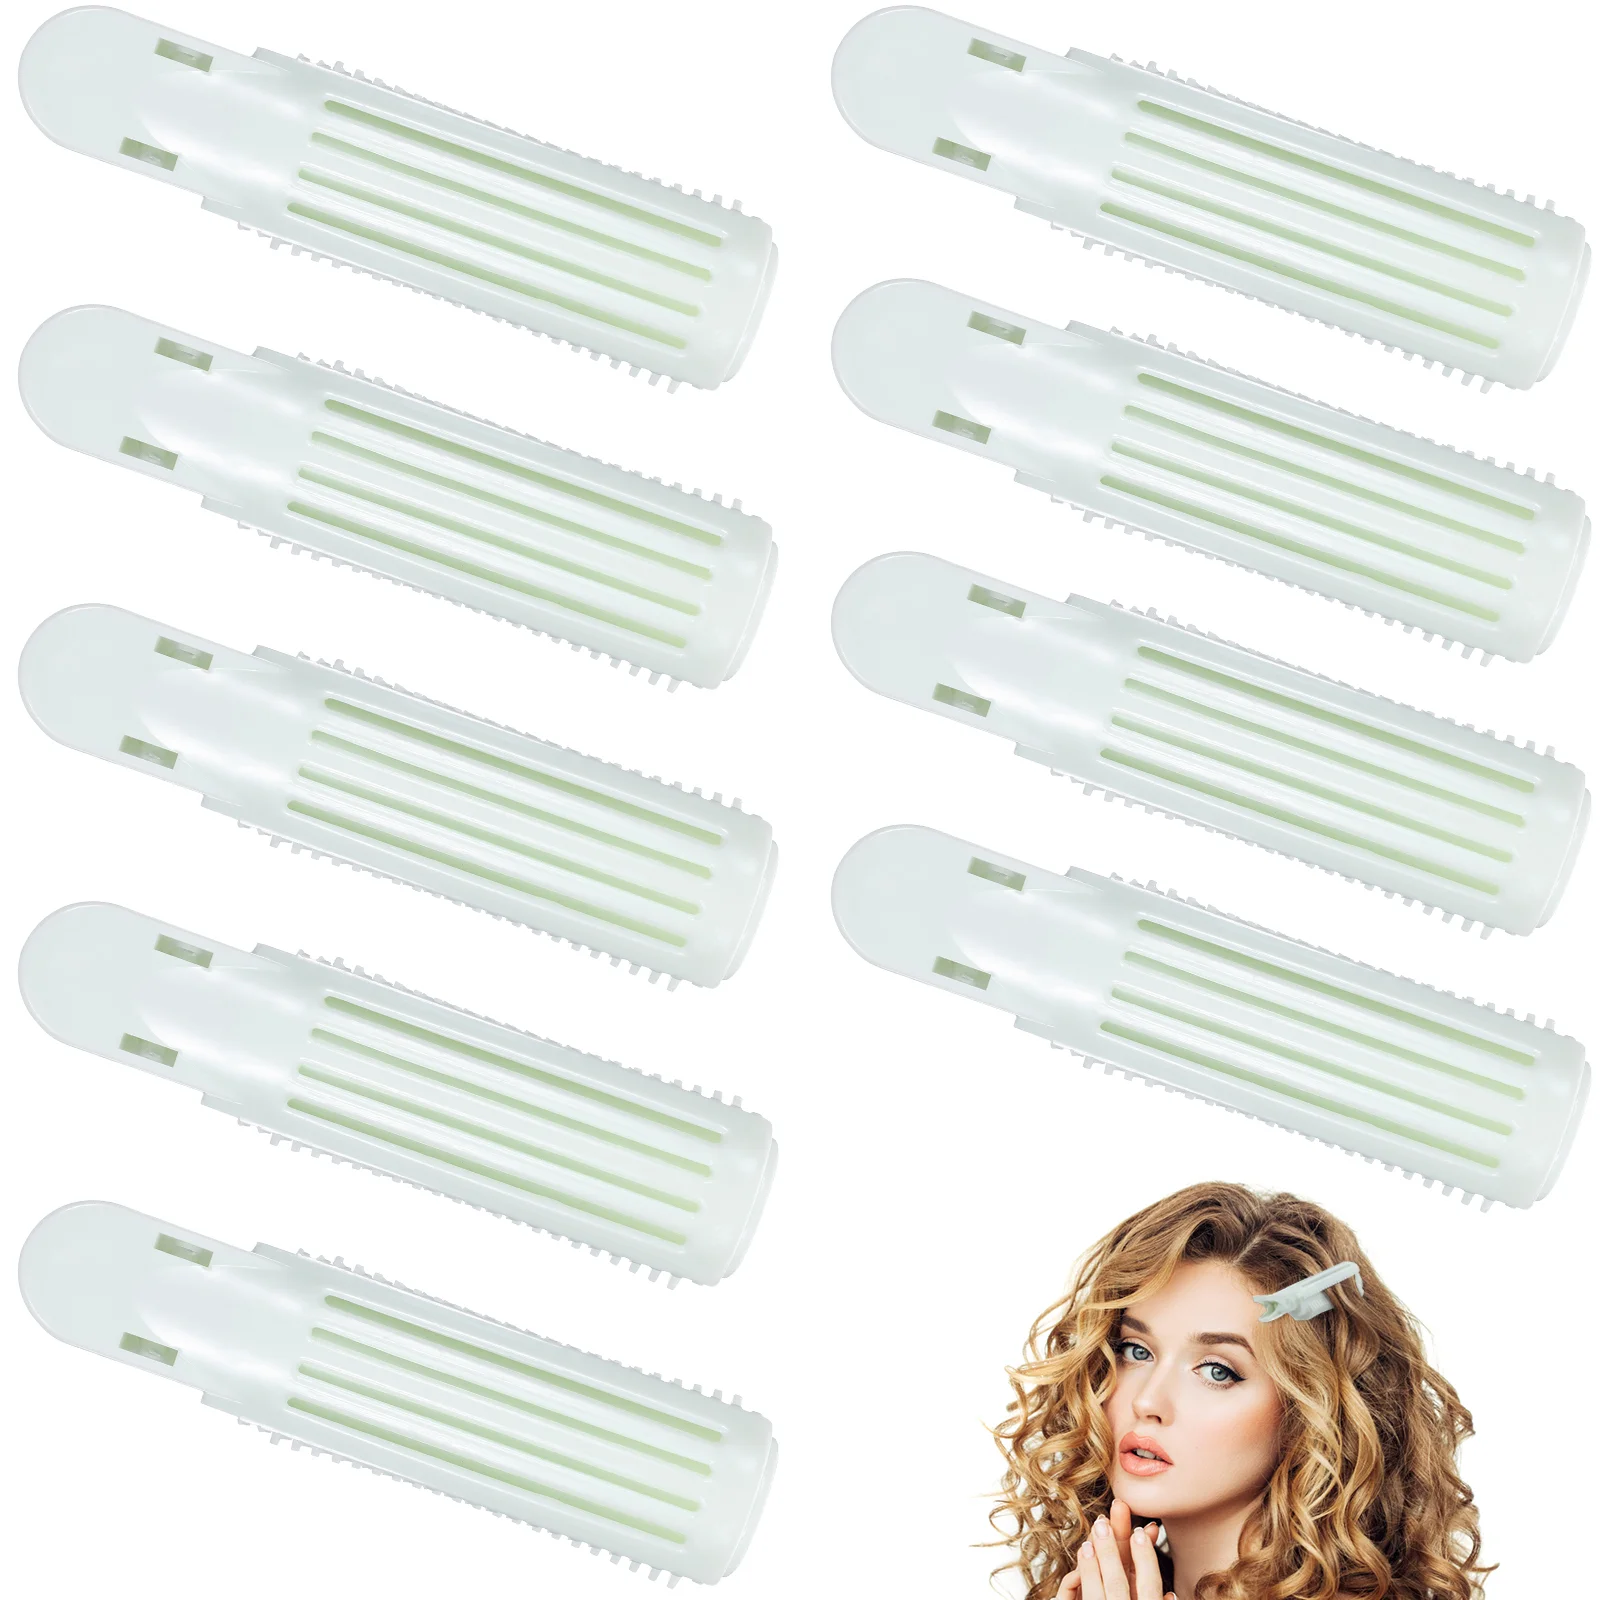 10 Pcs Curlers Bangs Clips Root for Curly Hair Volume Rollers Barrettes Volumizing Adjustable